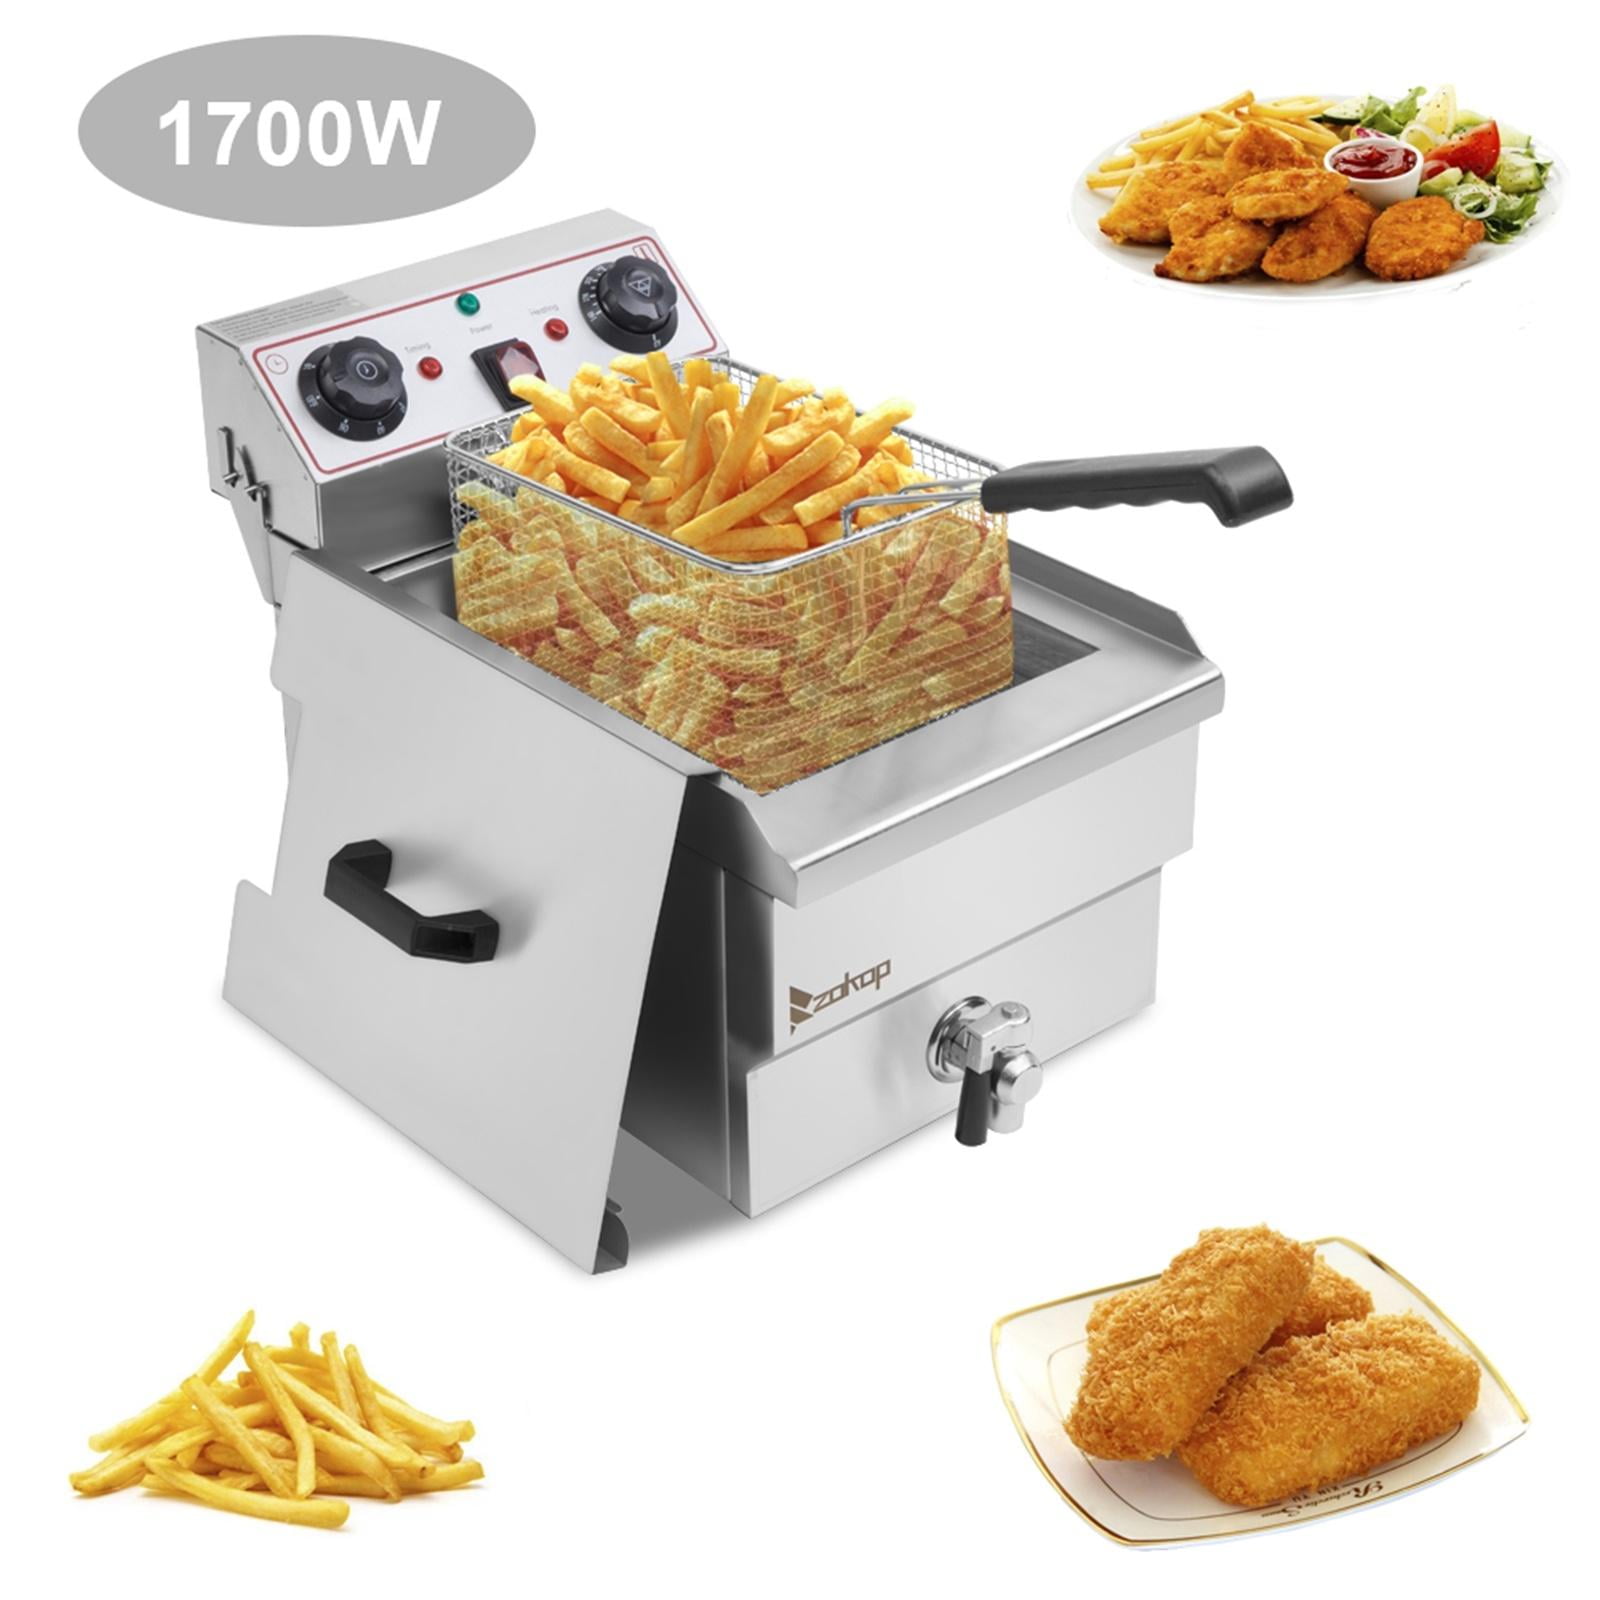 SHENGSHIYU Fryer, Commercial Fryer 8/16l Single/Dual Tank, Electric Fryer  with Basket, Electric Countertop Fryer, 3000/6000w, Restaurant or Home Use